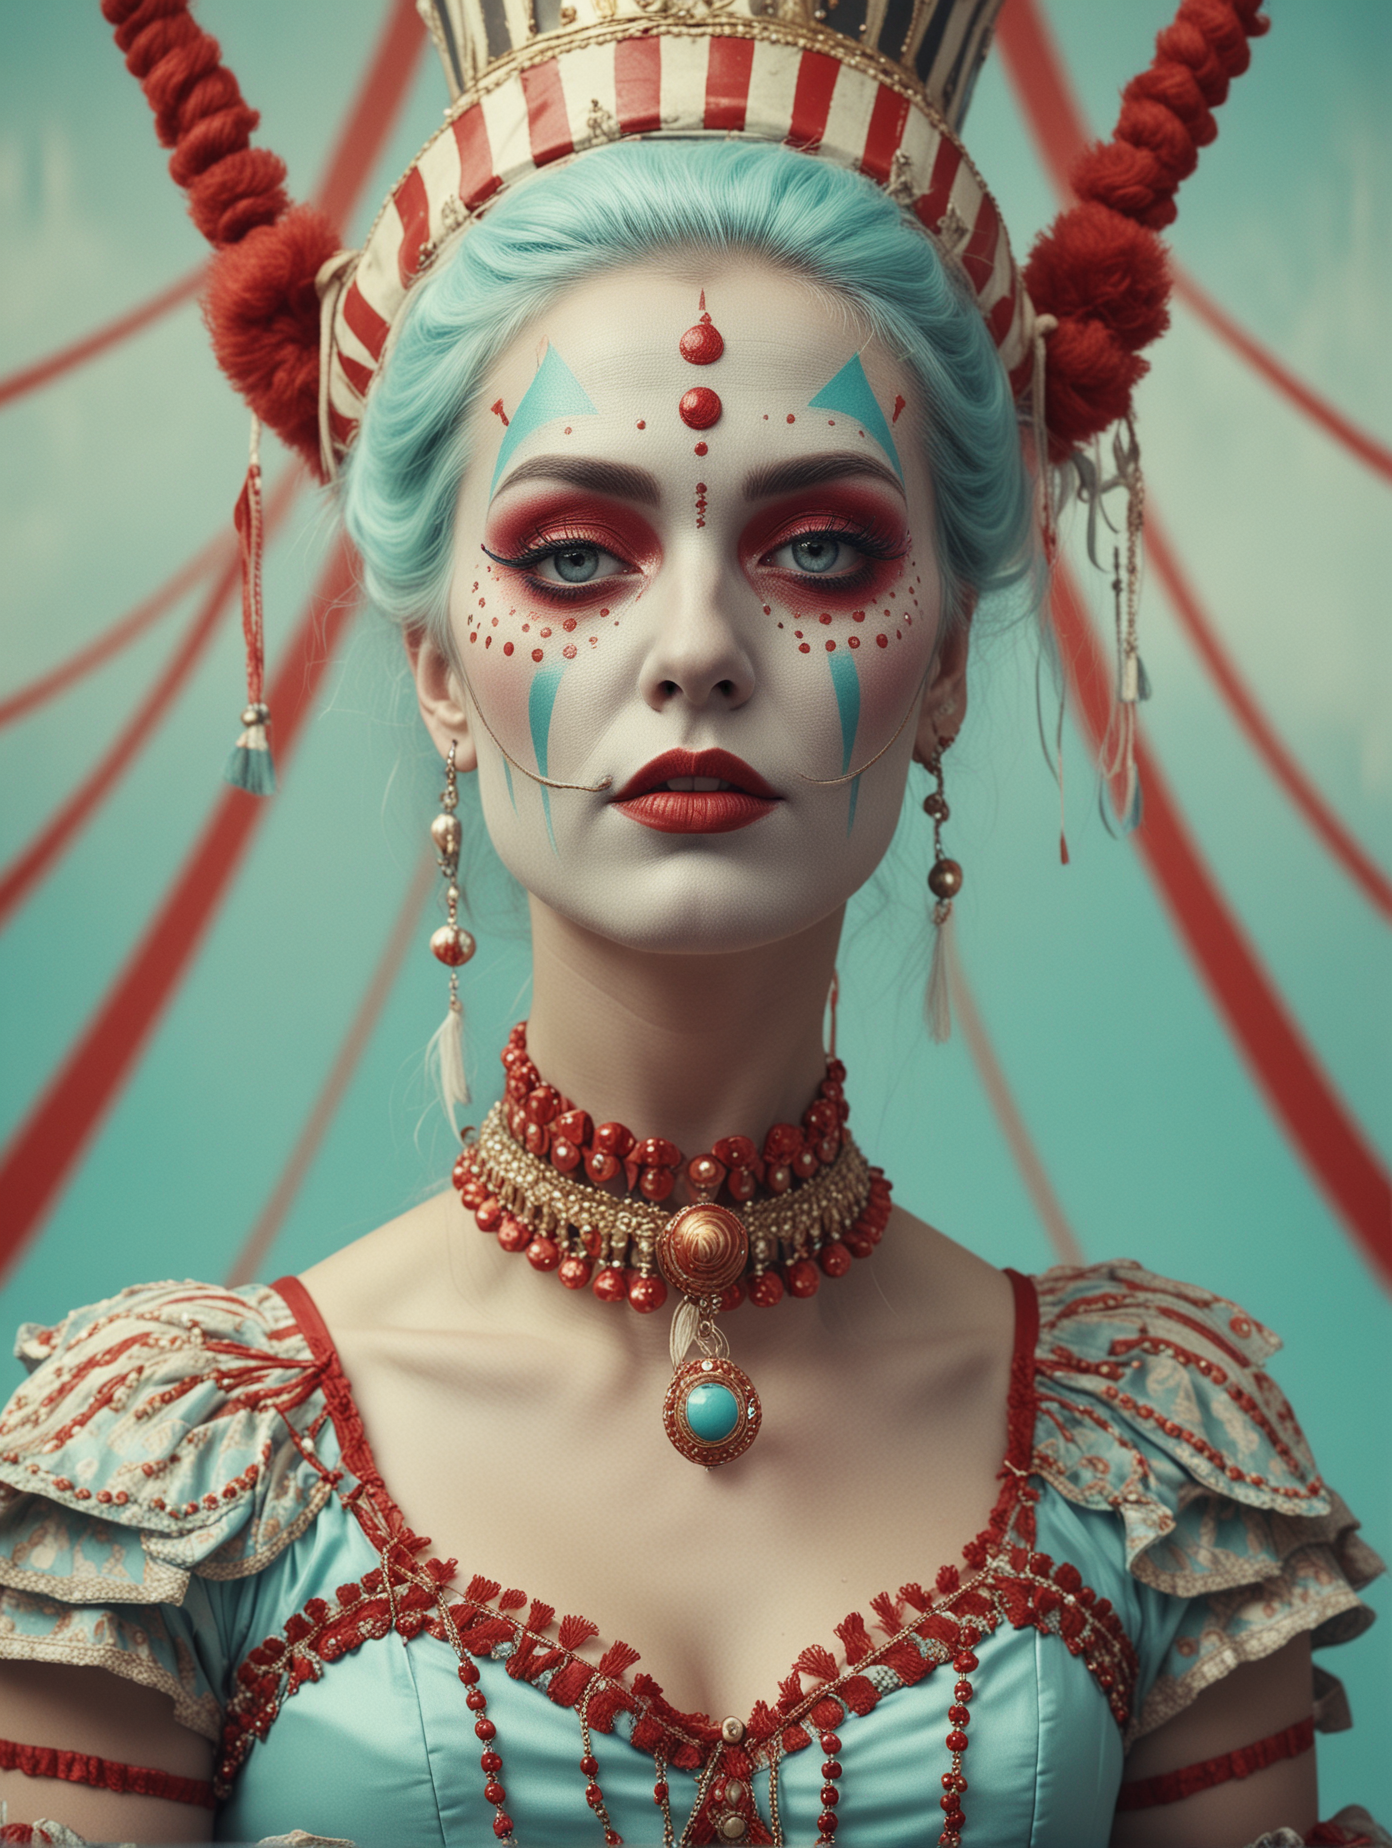 circus, in the style of whimsical yet eerie circus symbolism, light cyan and red palette, close up portraiture, nature-inspired pieces, elaborate costumes, ultra details